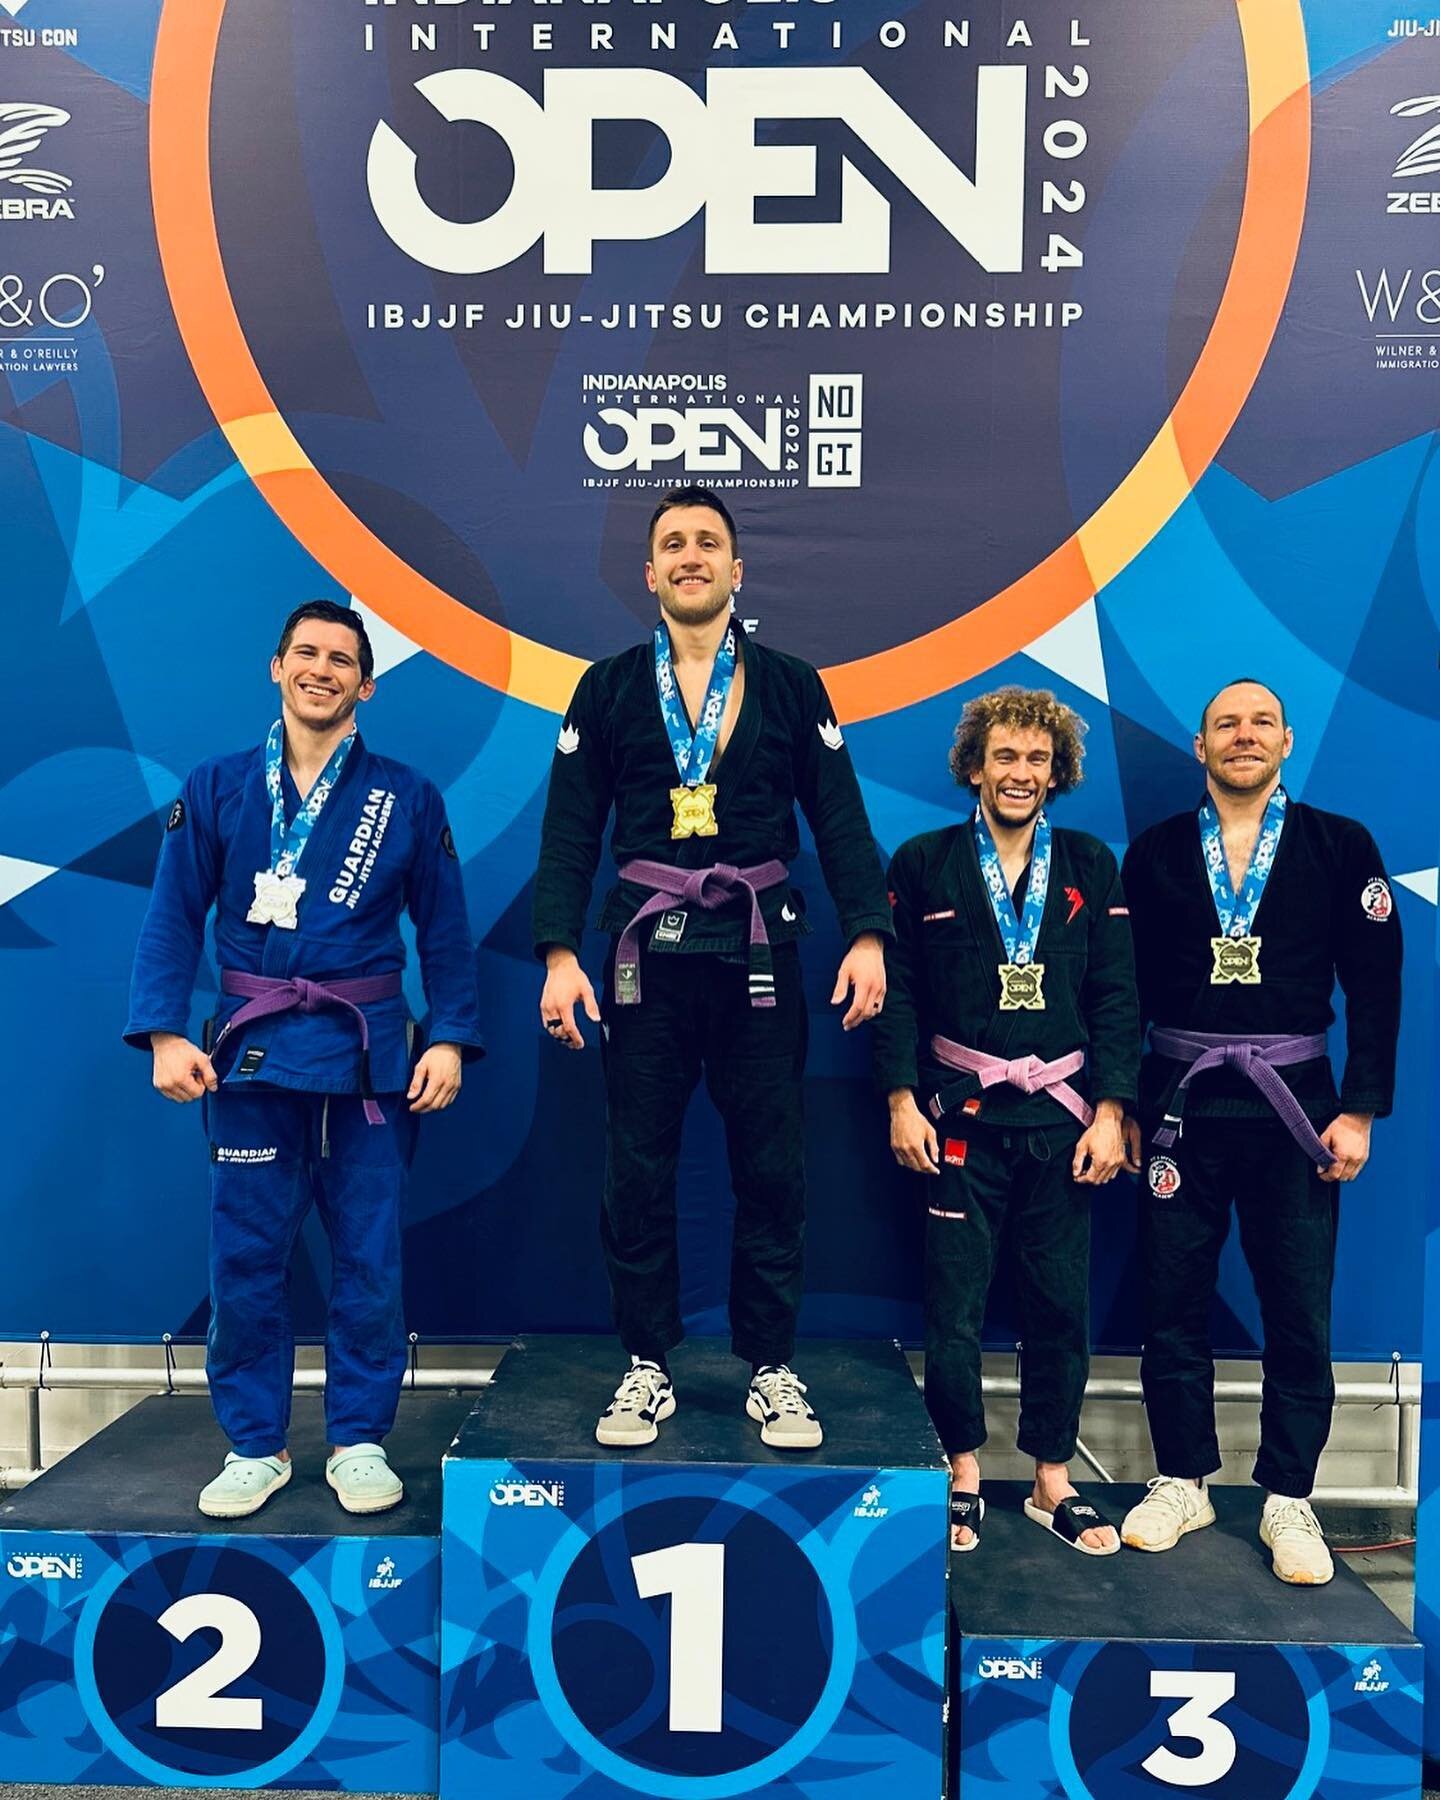 Team! Unreal performances this weekend. We are a single, unaffiliated school - and we made it into the IBJJF top 10 on both days at an out of town Open! 🤯

I can&rsquo;t wait for Chicago. Poster going up this week!